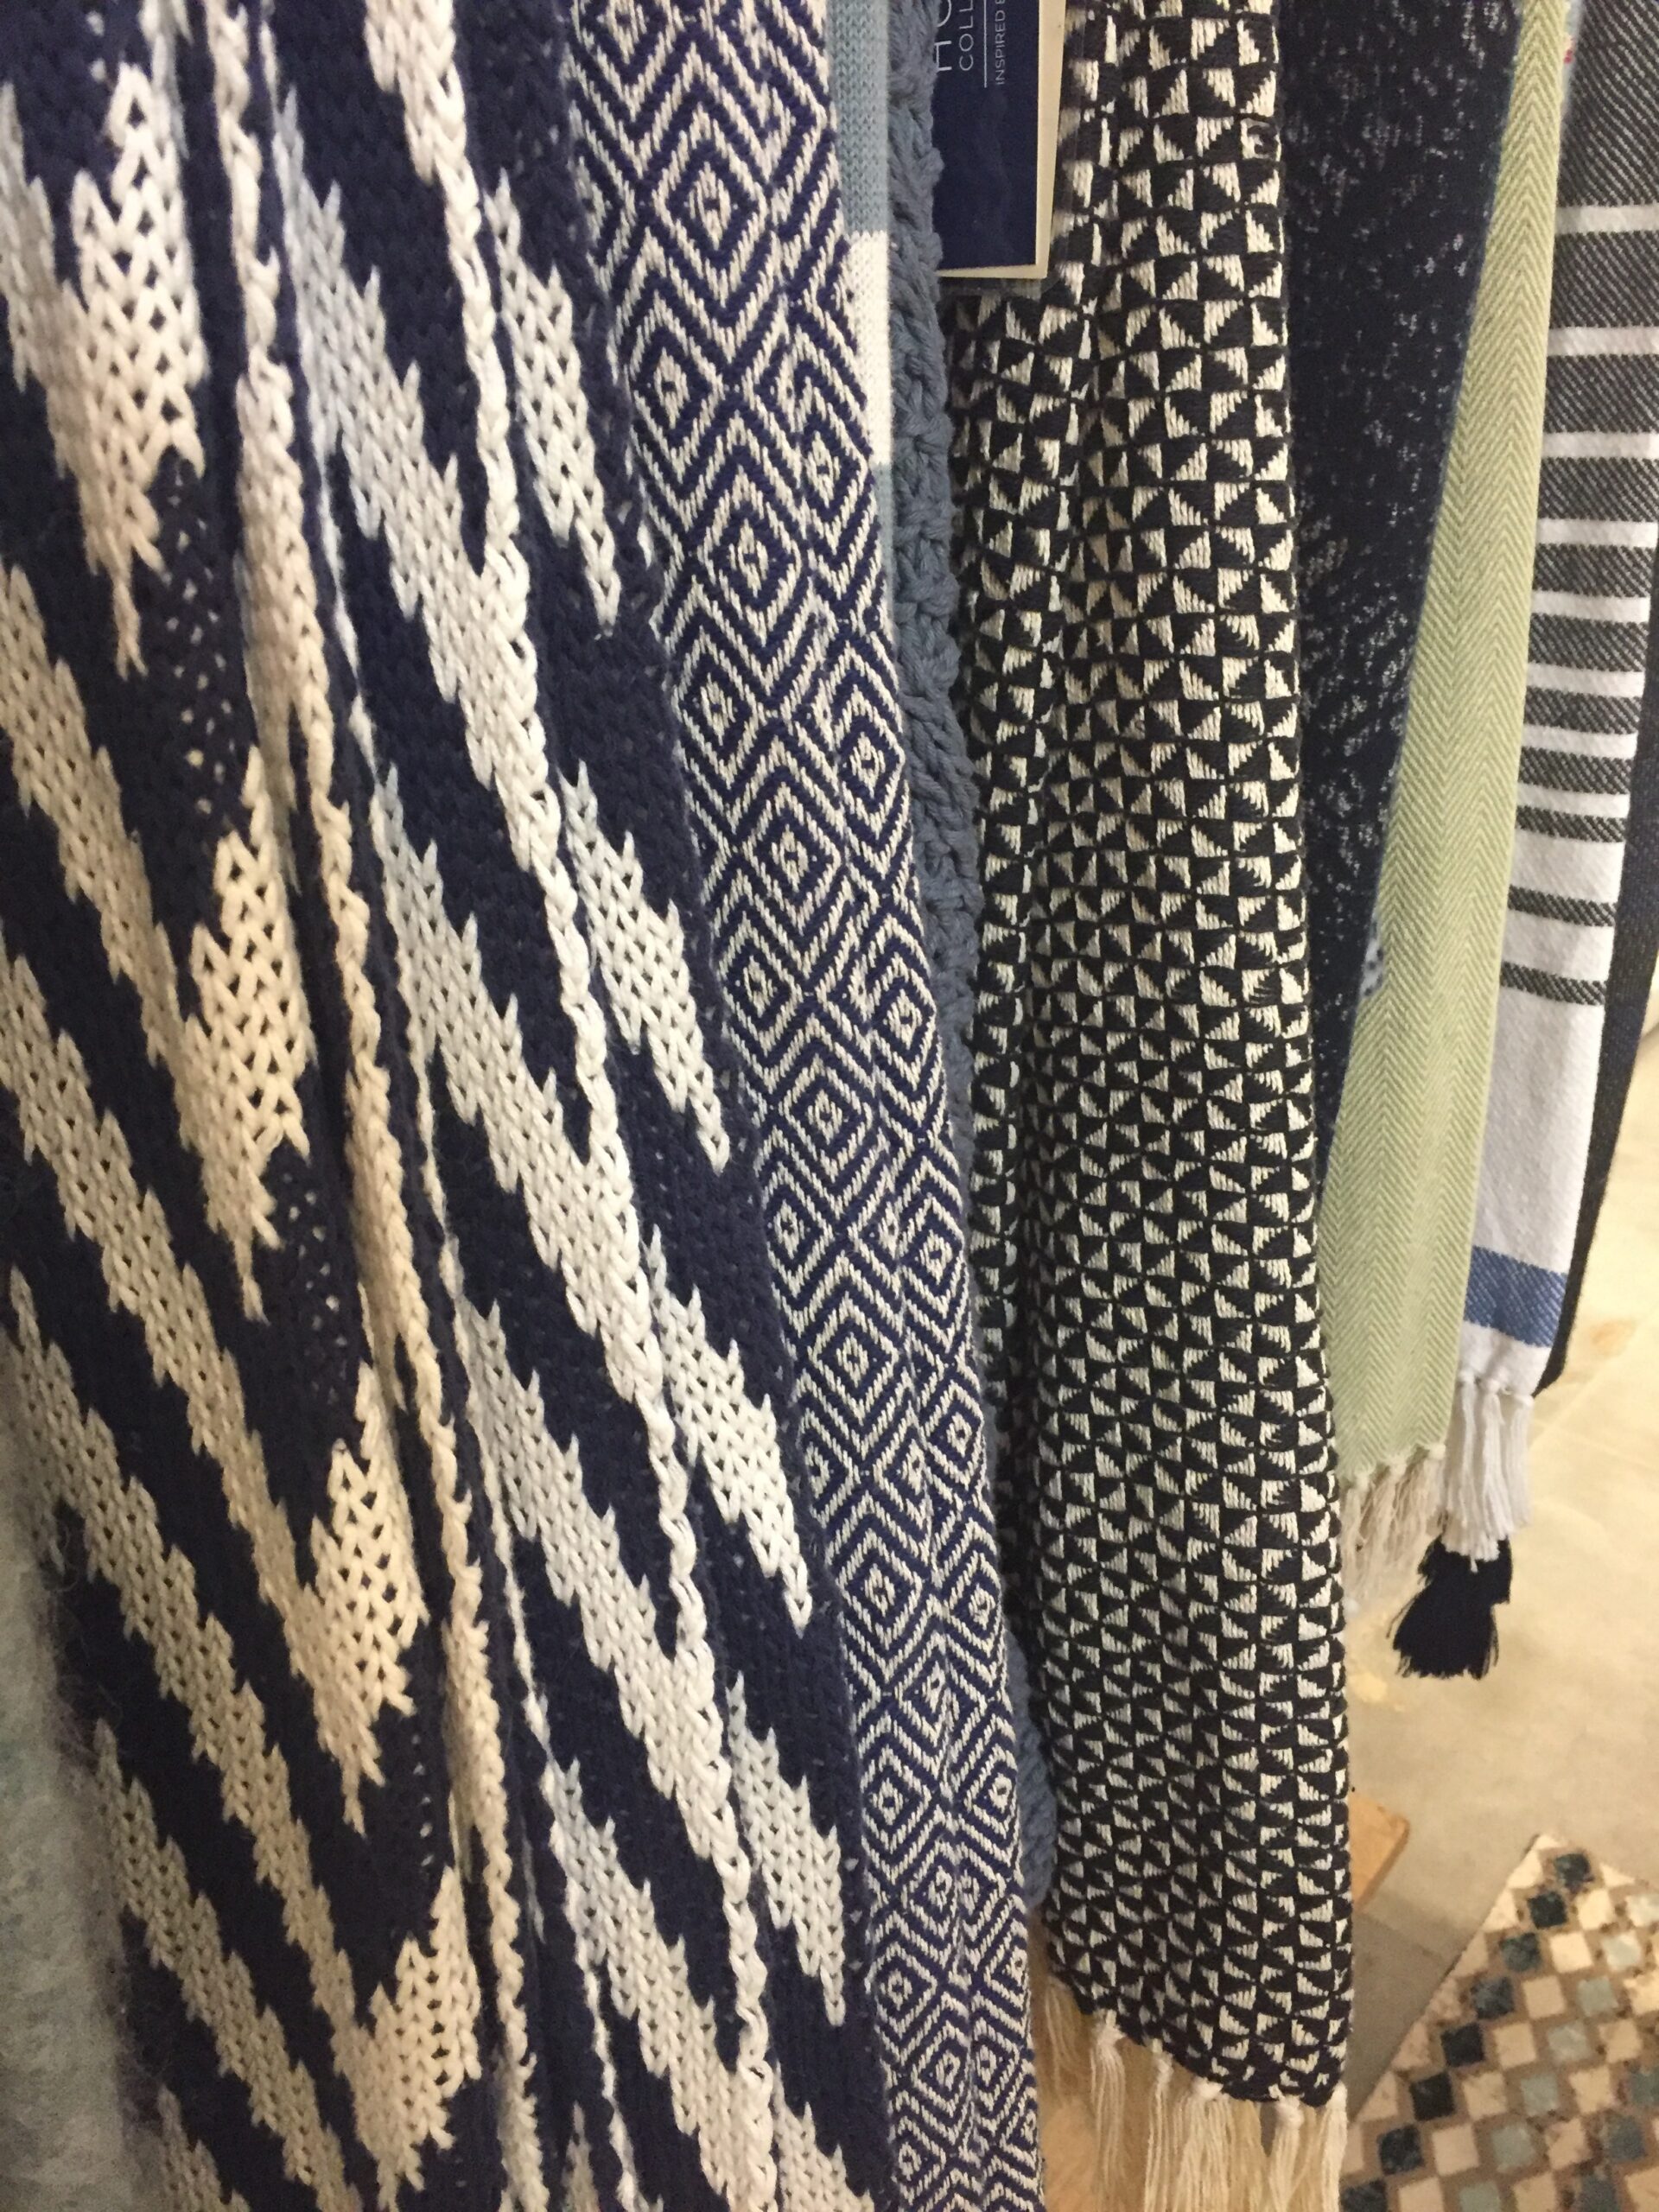 Texture and pattern are wonderful additions to these throws from Loloi Rugs.